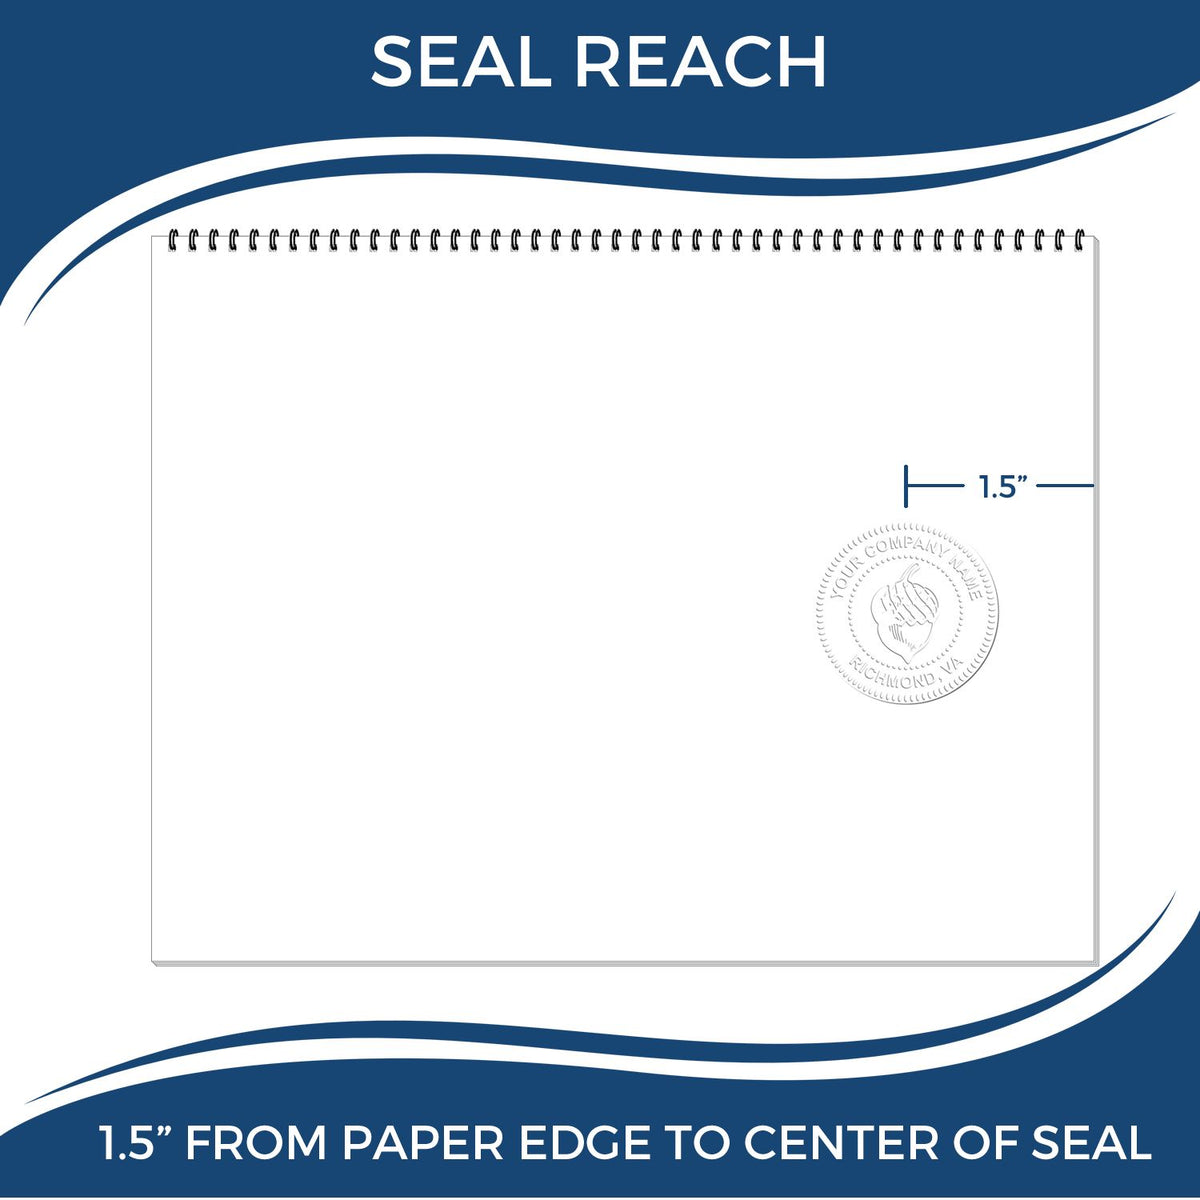 An infographic showing the seal reach which is represented by a ruler and a miniature seal image of the Gift South Dakota Land Surveyor Seal